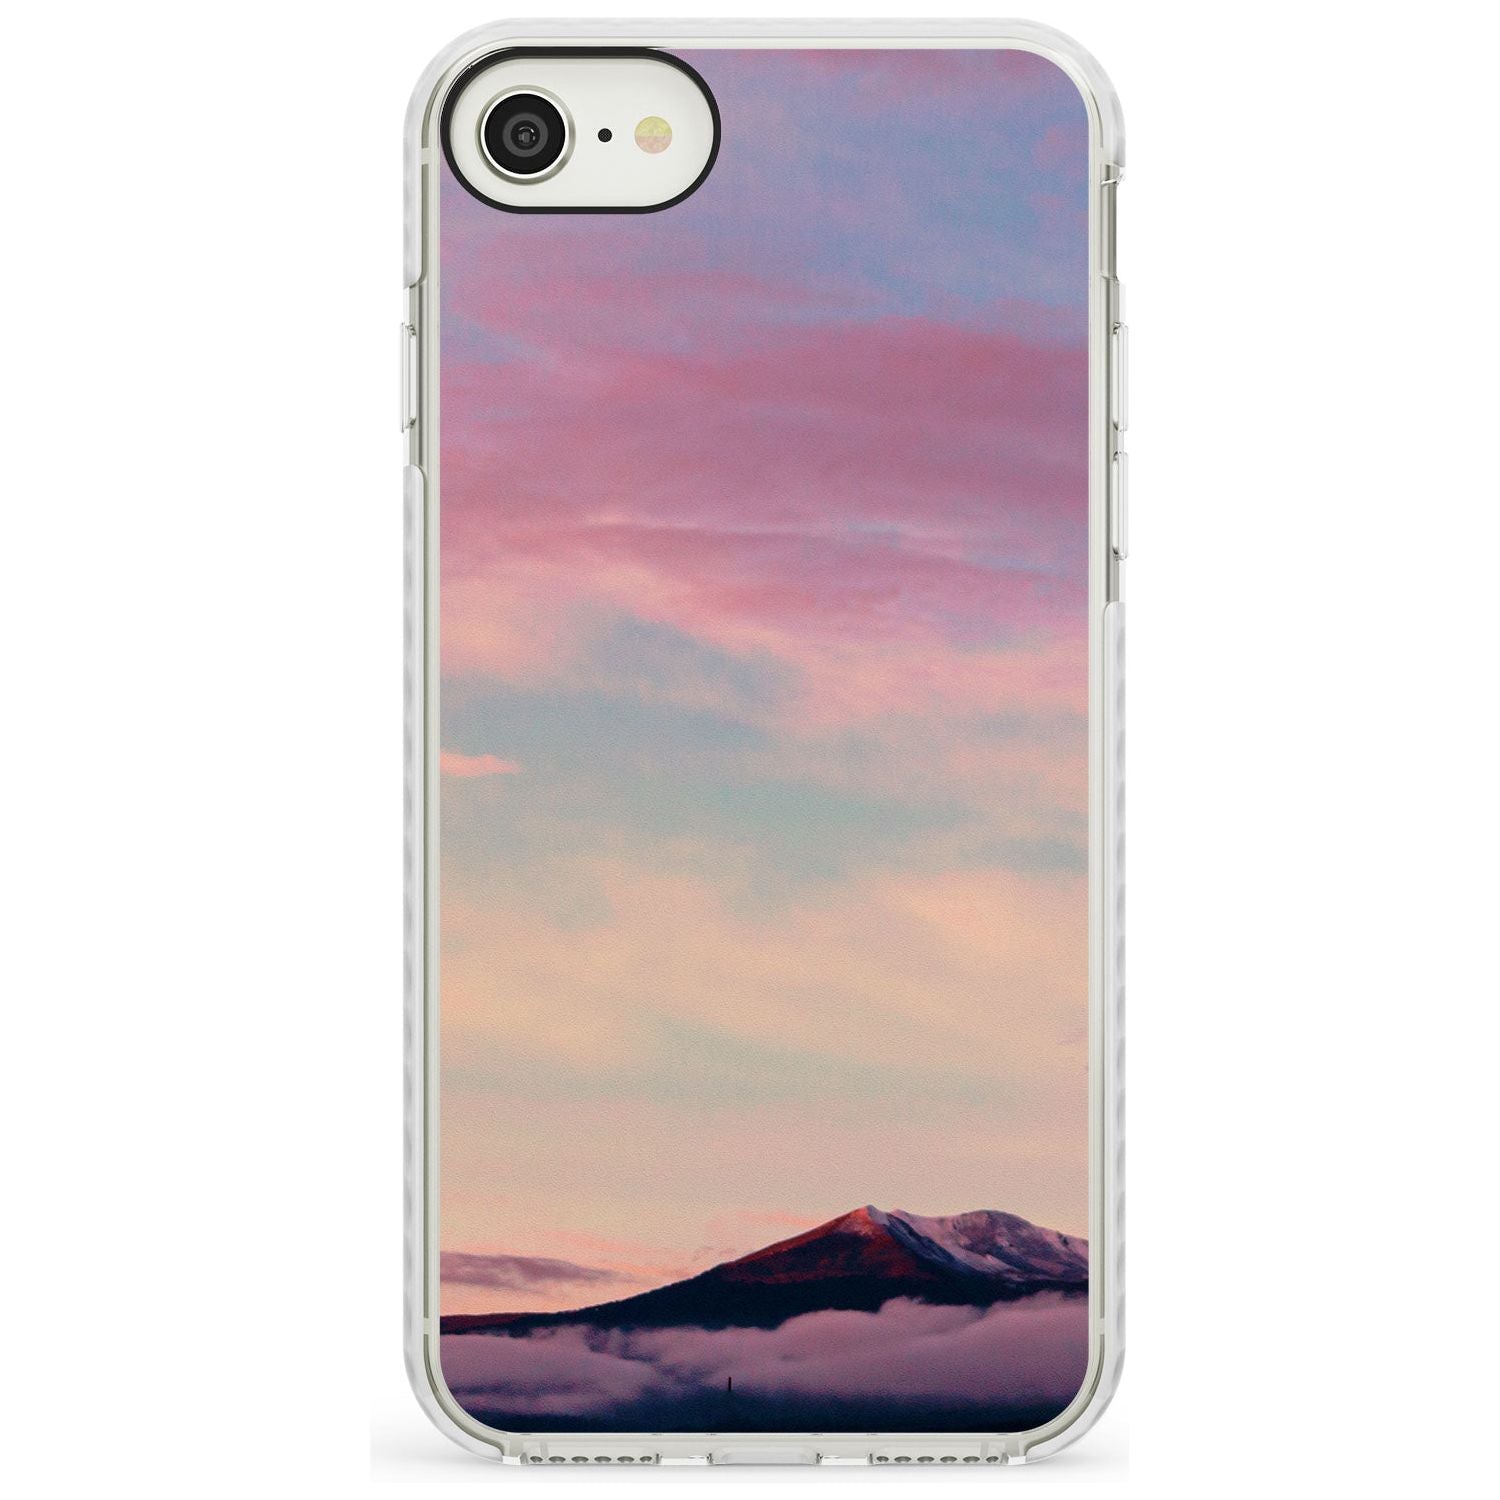 Cloudy Sunset Photograph Impact Phone Case for iPhone SE 8 7 Plus